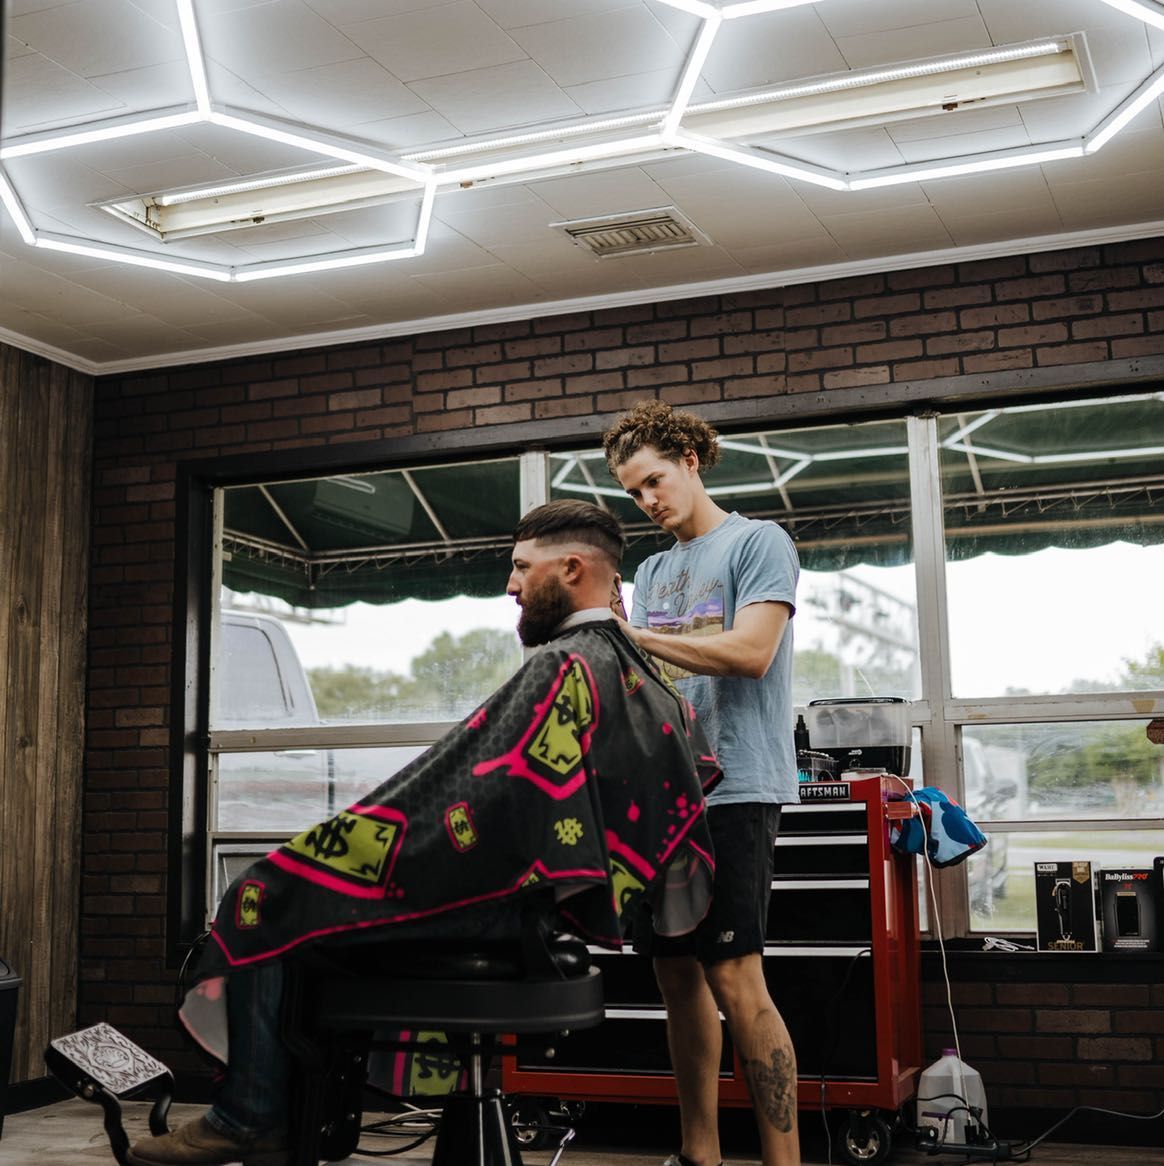 Top Notch Barber Studio - Bushnell - Book Online - Prices, Reviews, Photos